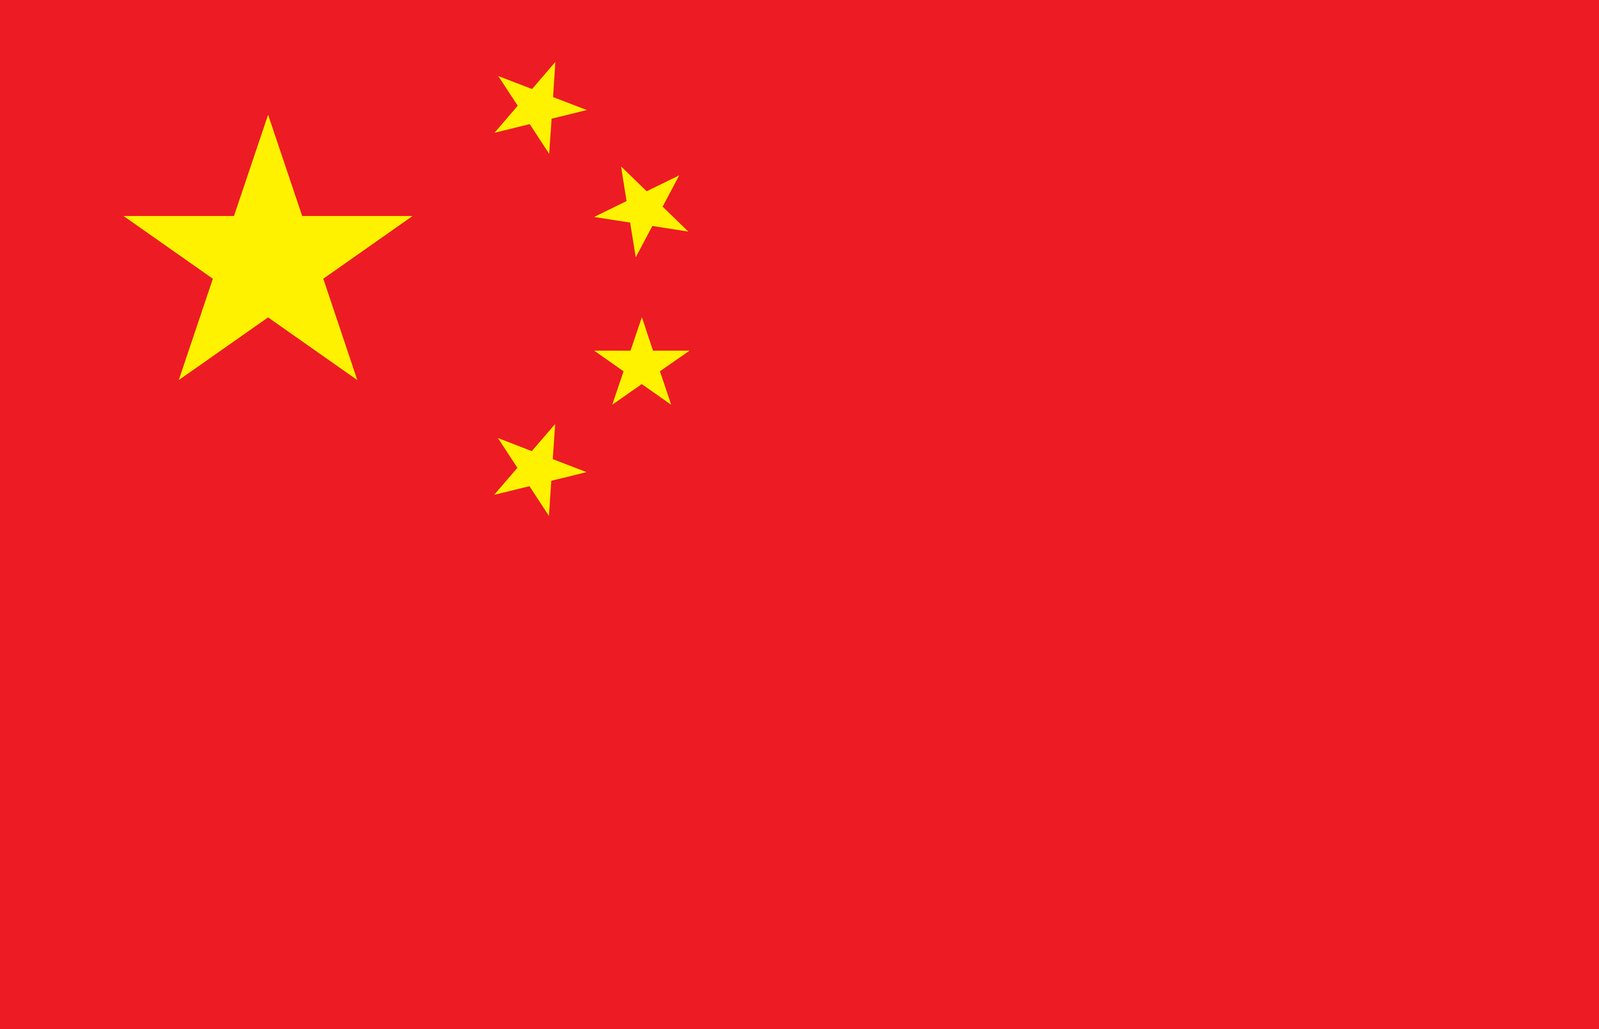 China flag Free Photo Download | FreeImages